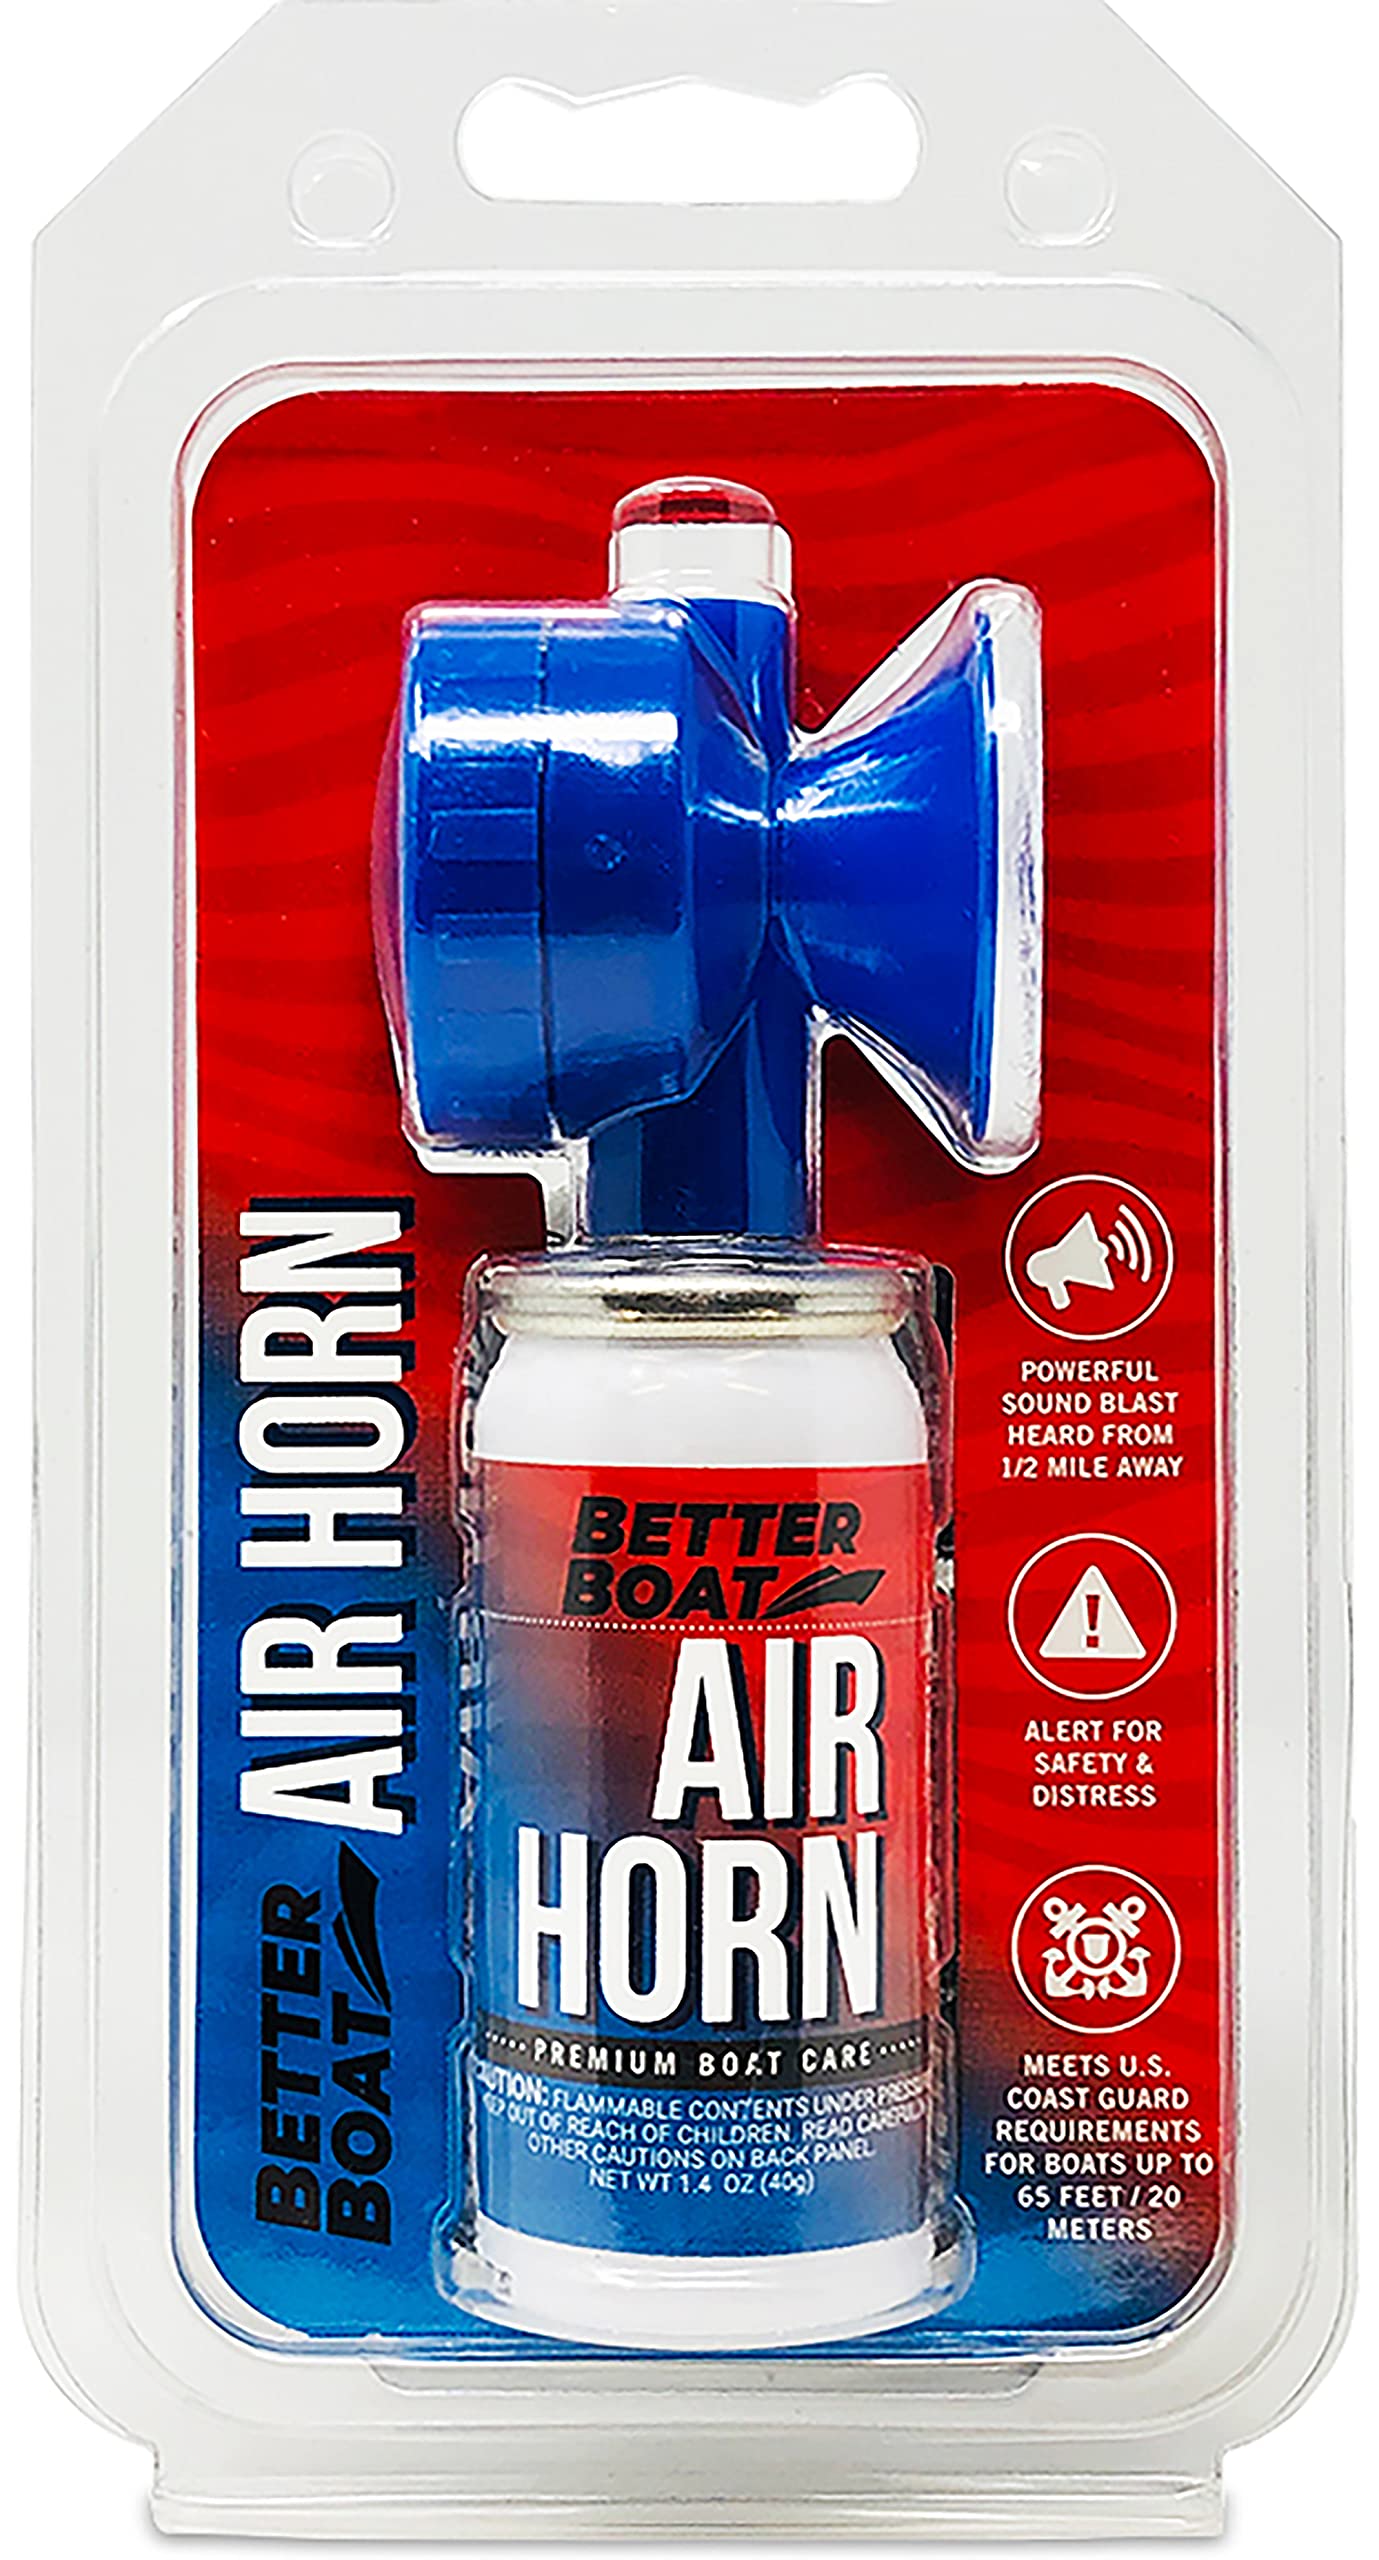 Air Horn Can for Boating & Safety Very Loud Canned Boat Accessories